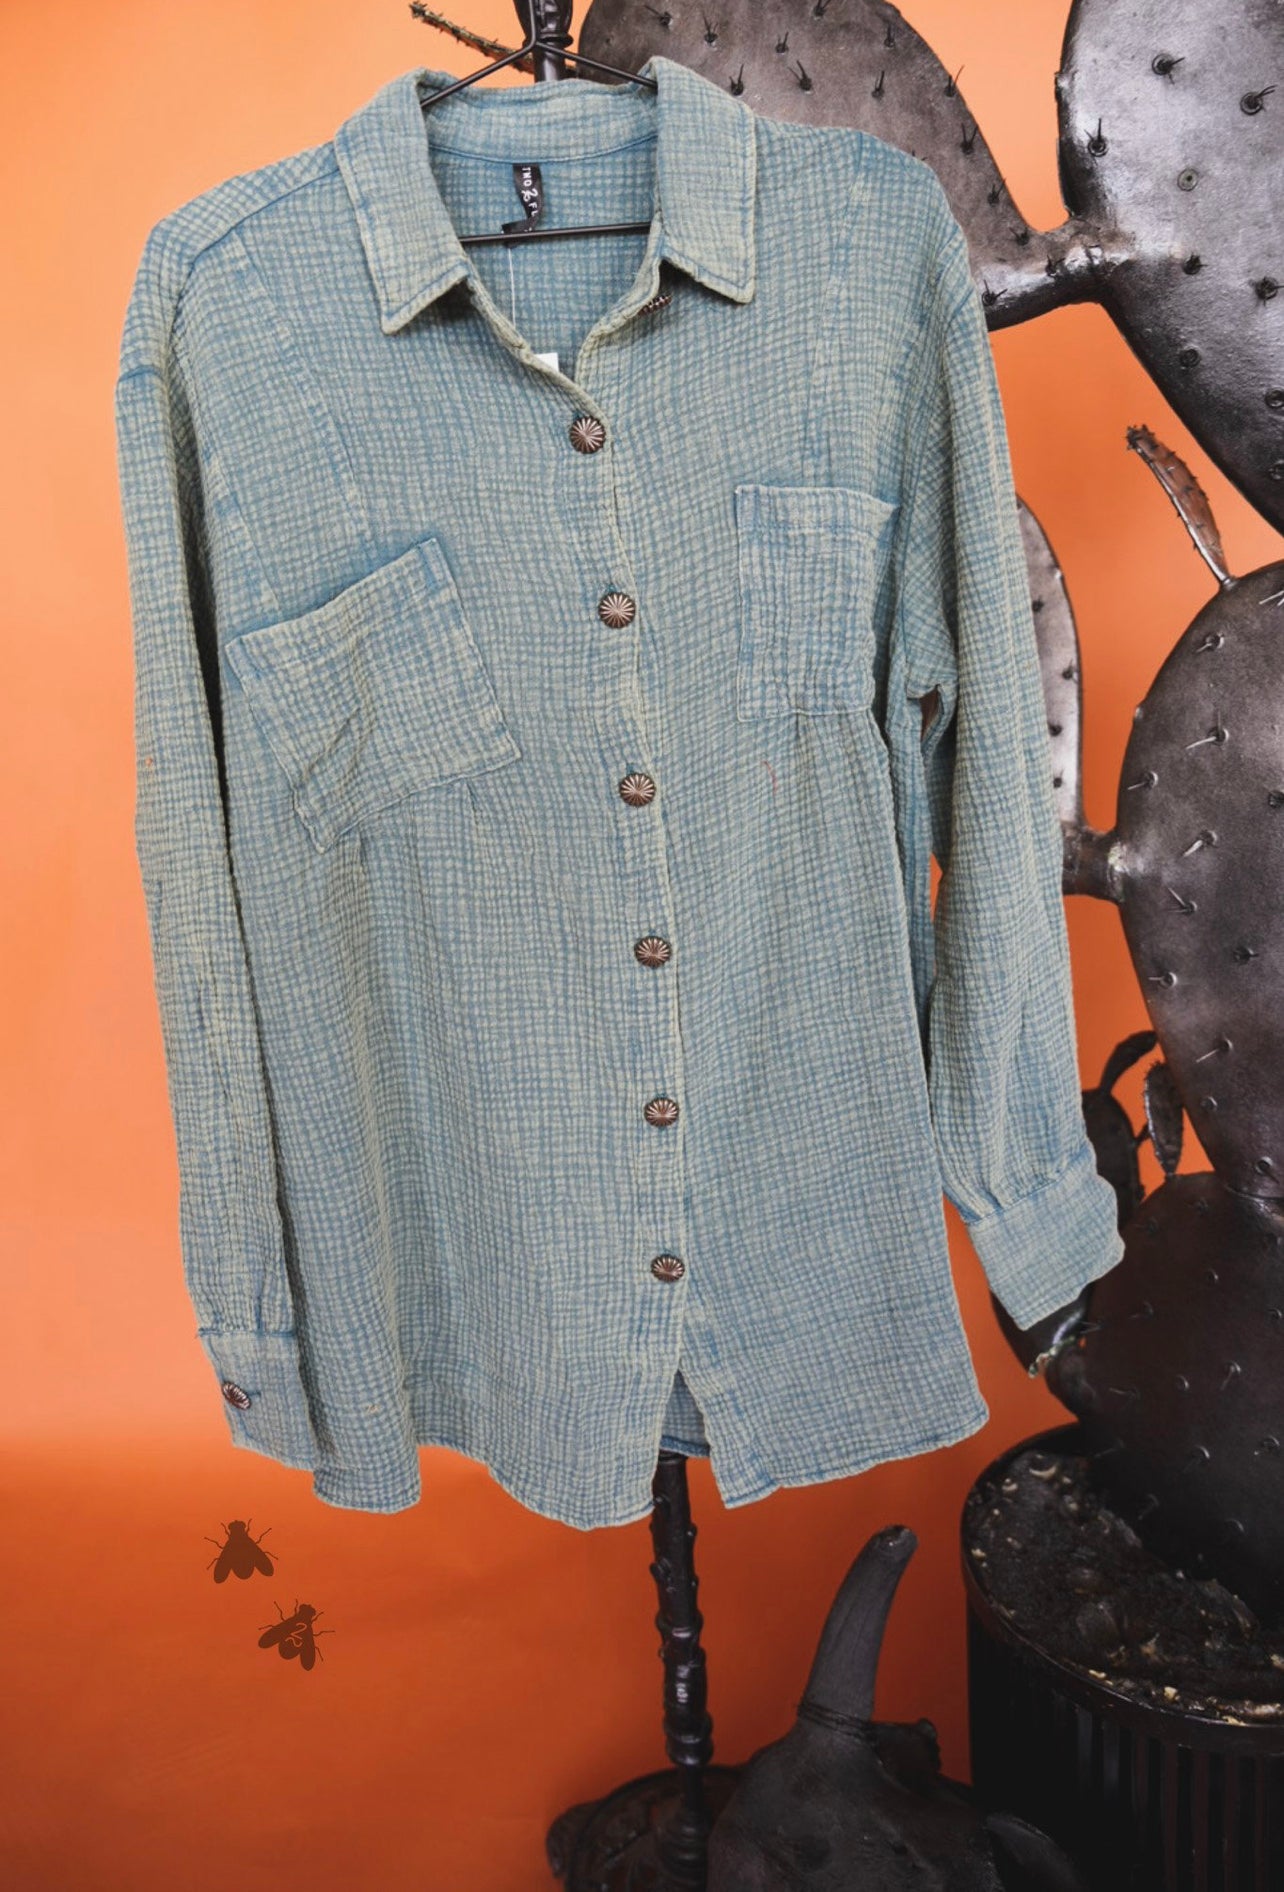 ACRES BUTTON UP * TEAL